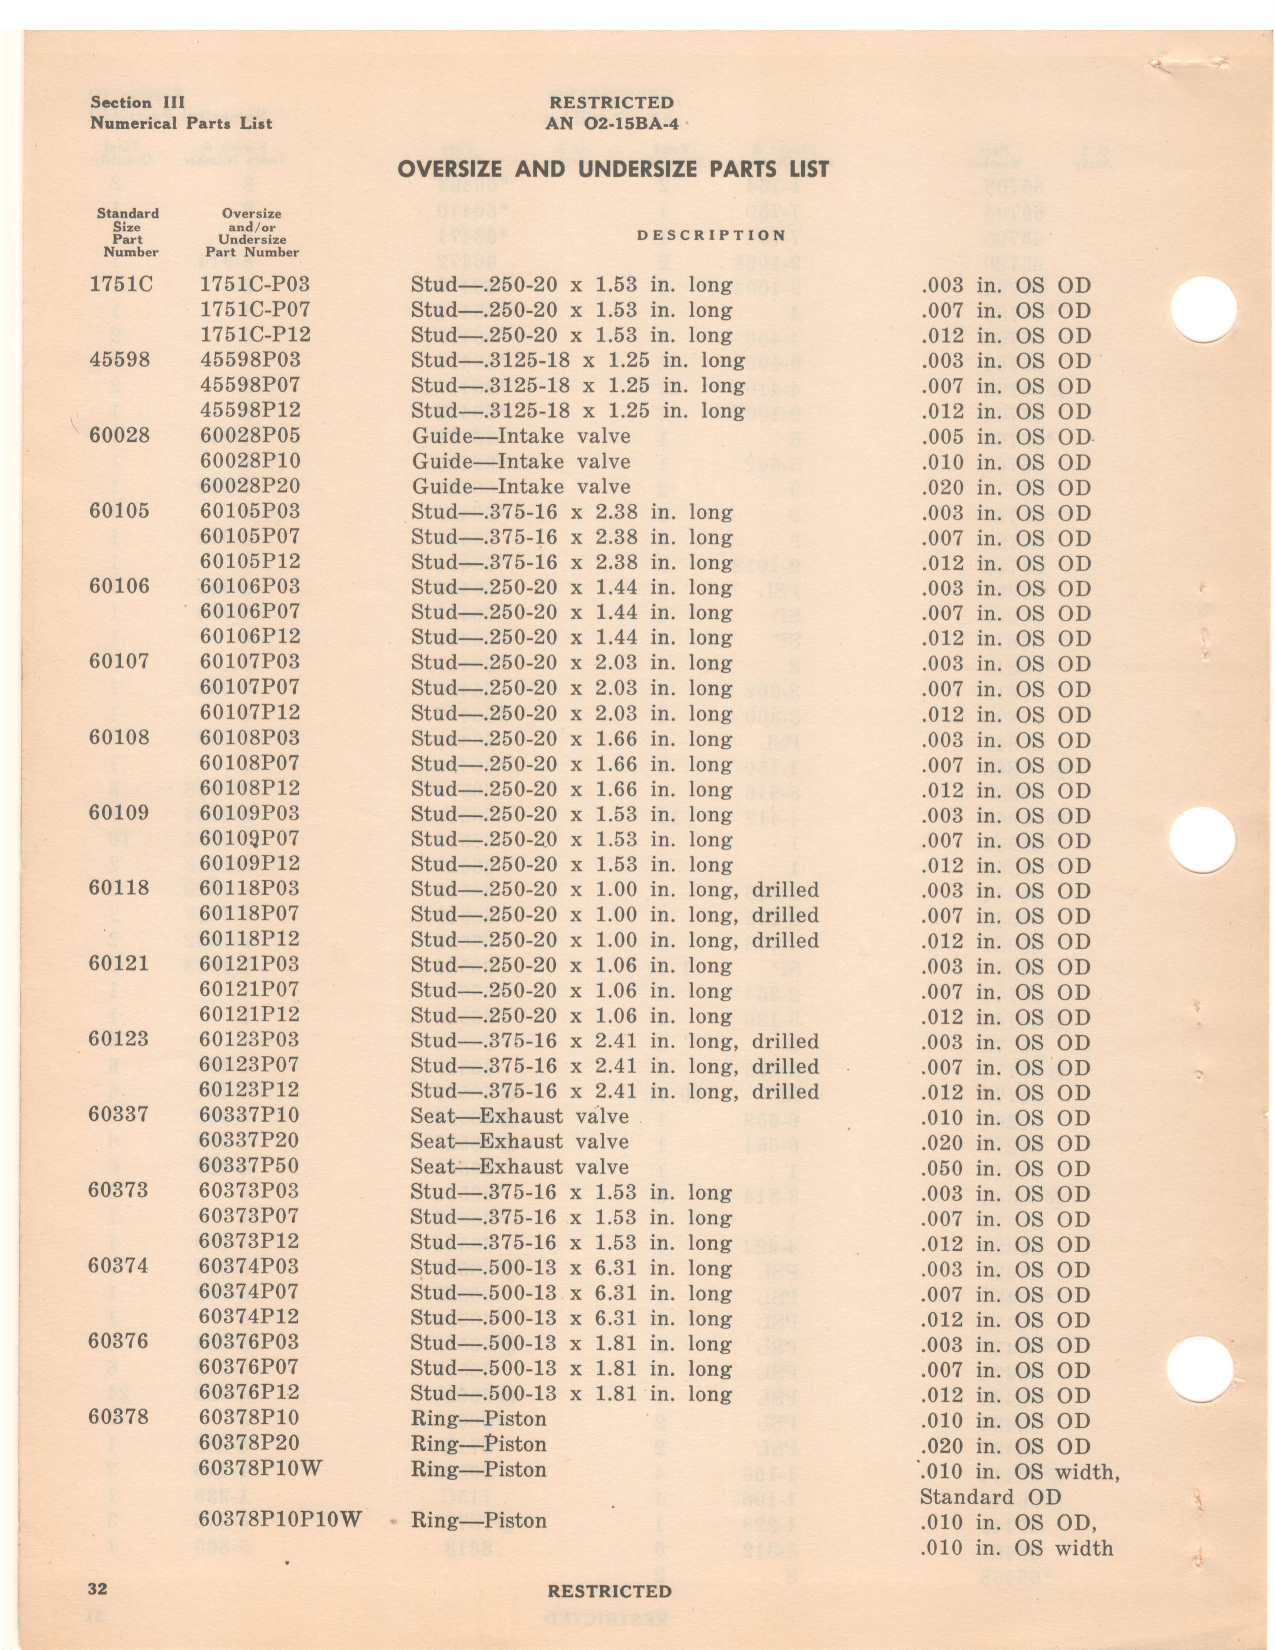 Sample page 36 from AirCorps Library document: Parts Catalog - O-435-1 & O-435-11 Engine